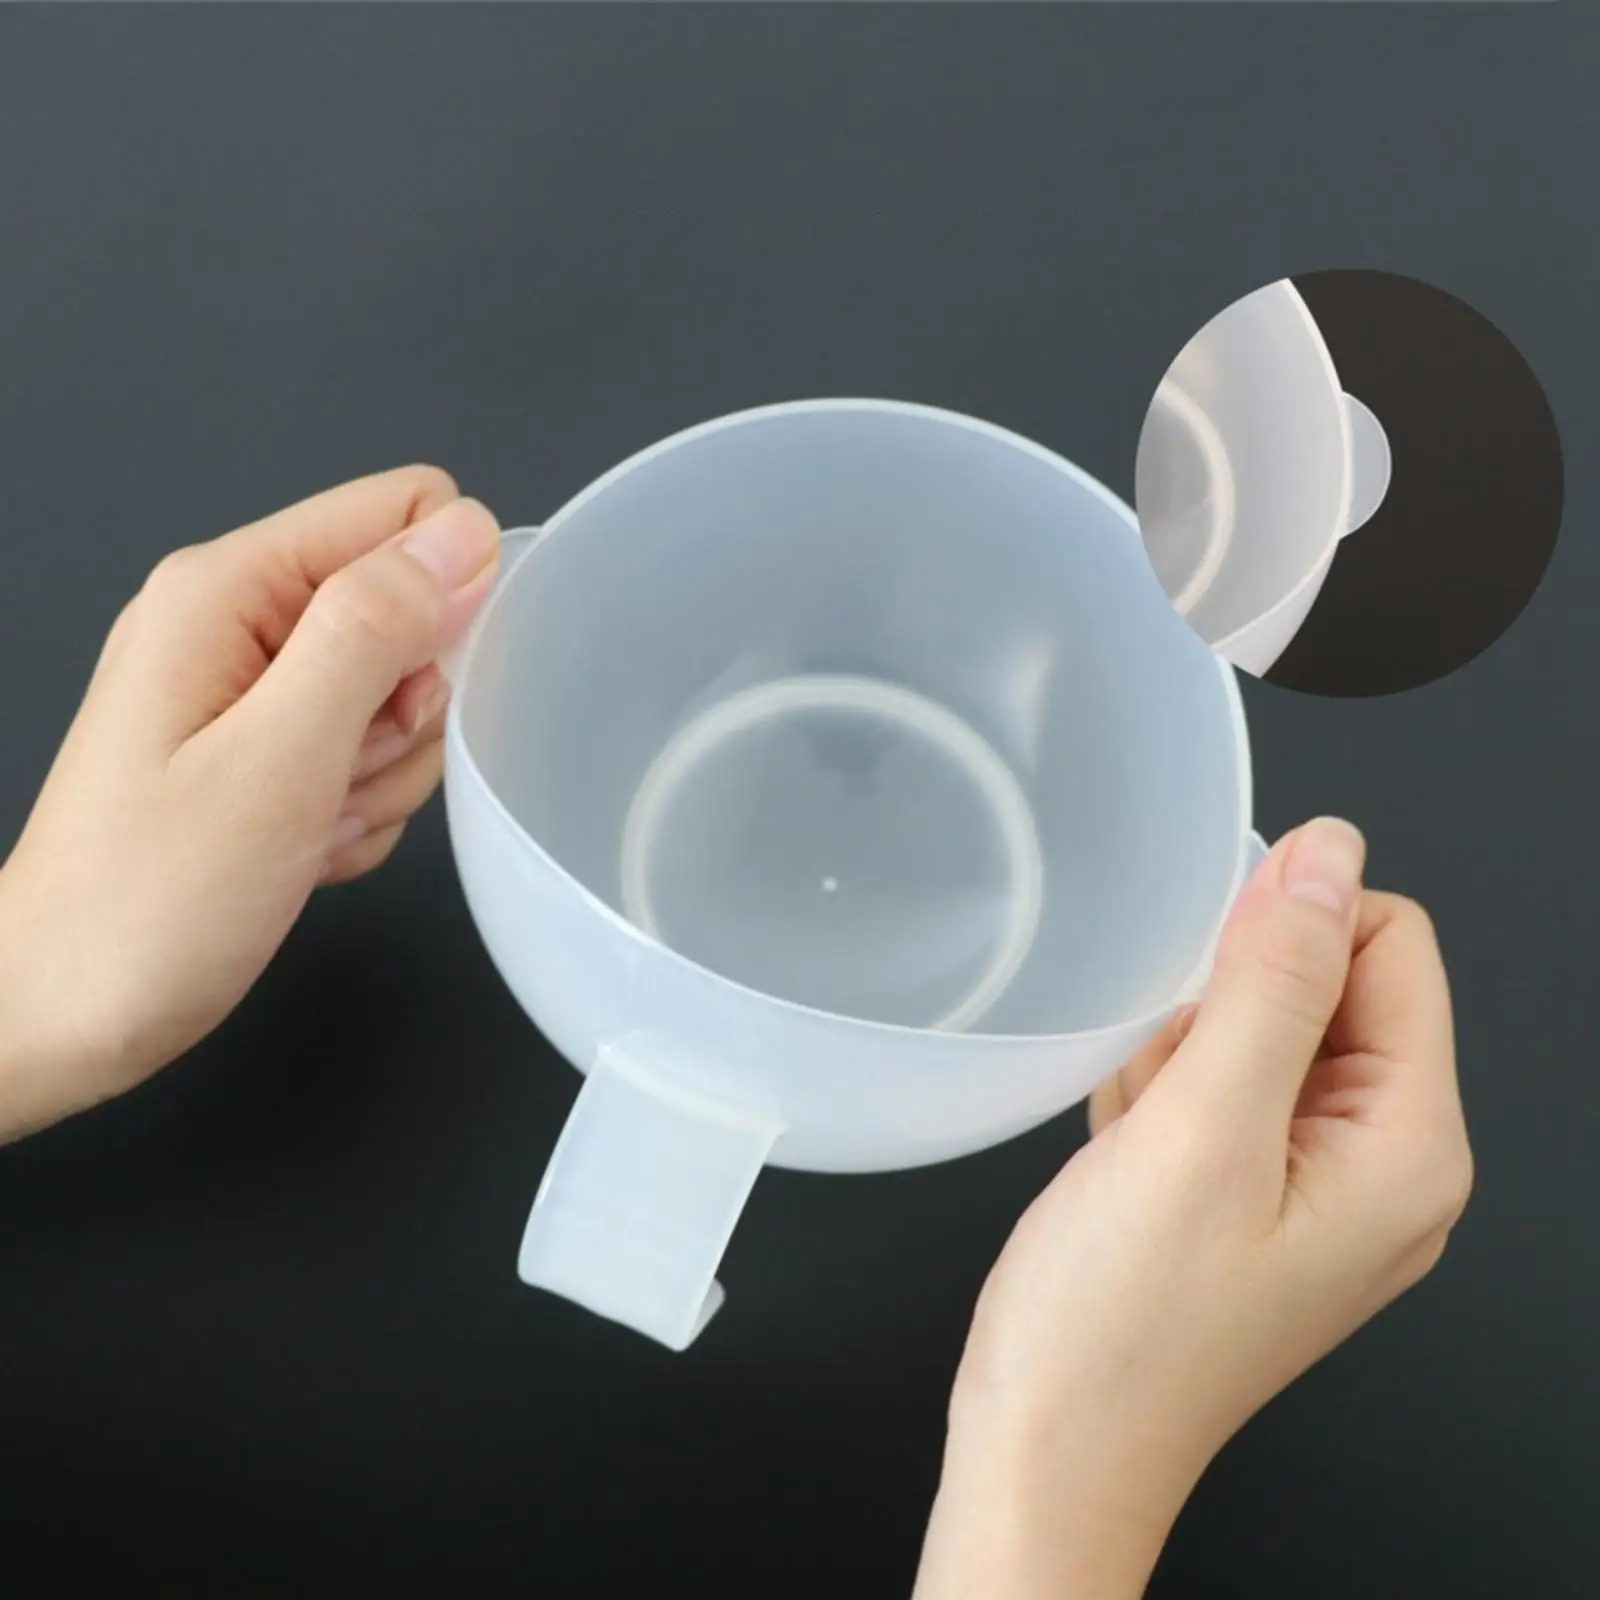 Spill Proof Scoop Bowl Adaptive Equipment Spill Proof Adaptive Bowl Bowl with Suction Cup Base Adults Elderly